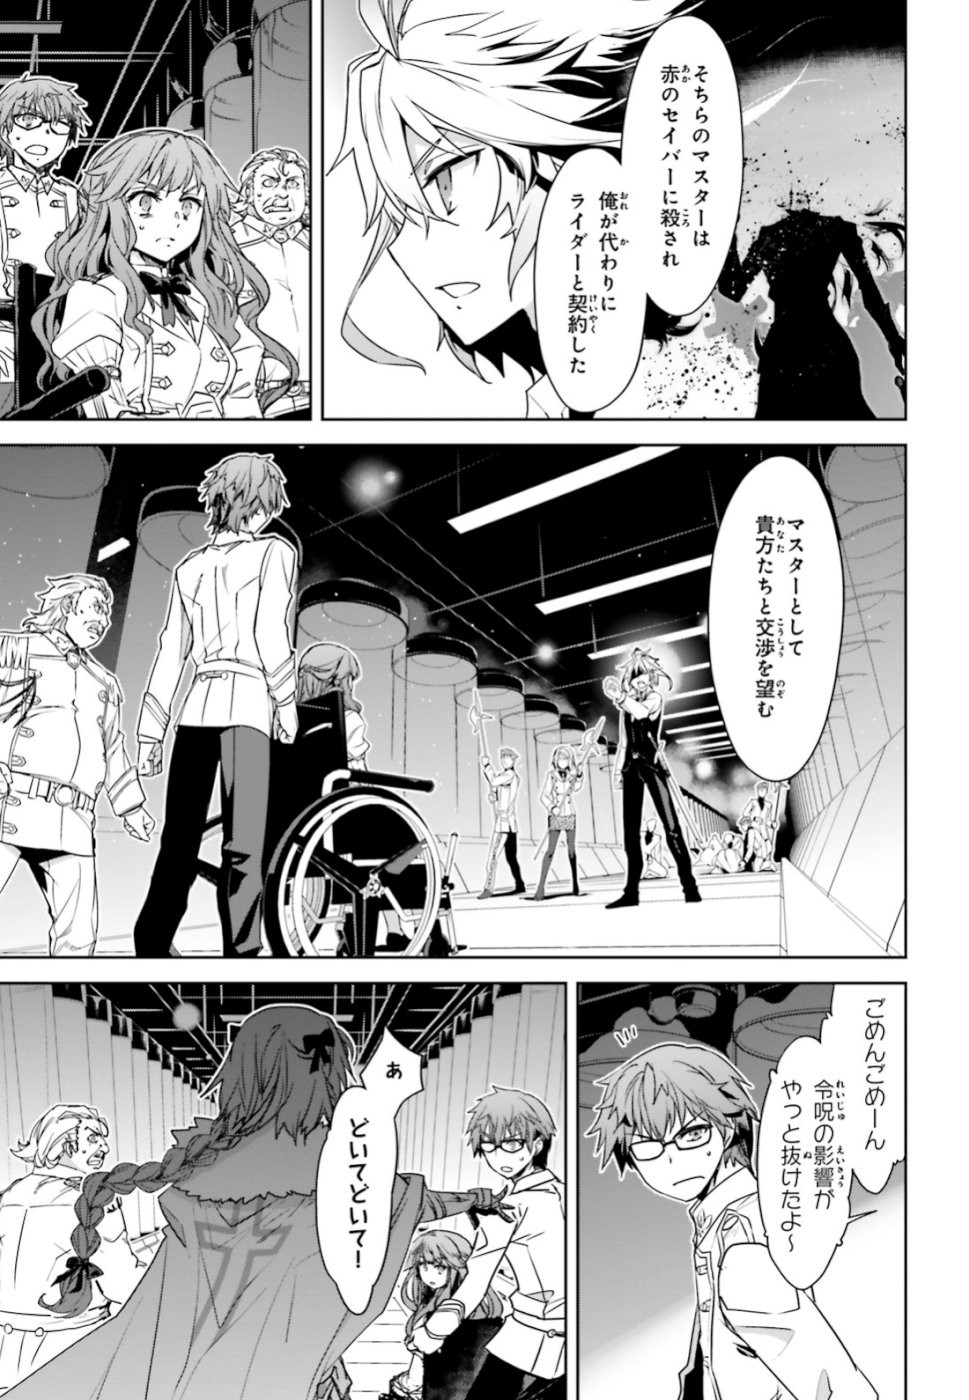 Fate-Apocrypha - Chapter 34 - Page 3